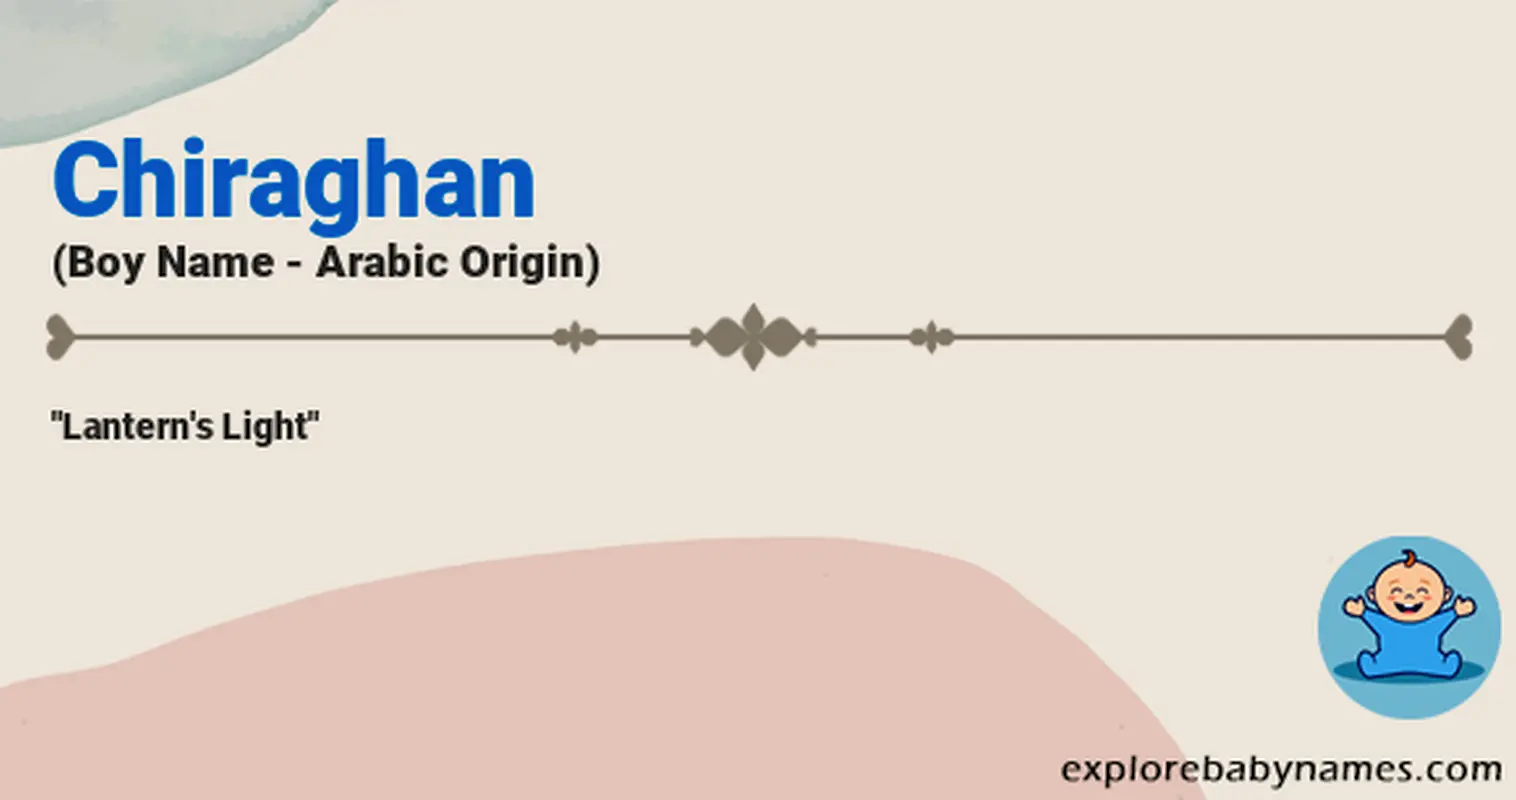 Meaning of Chiraghan